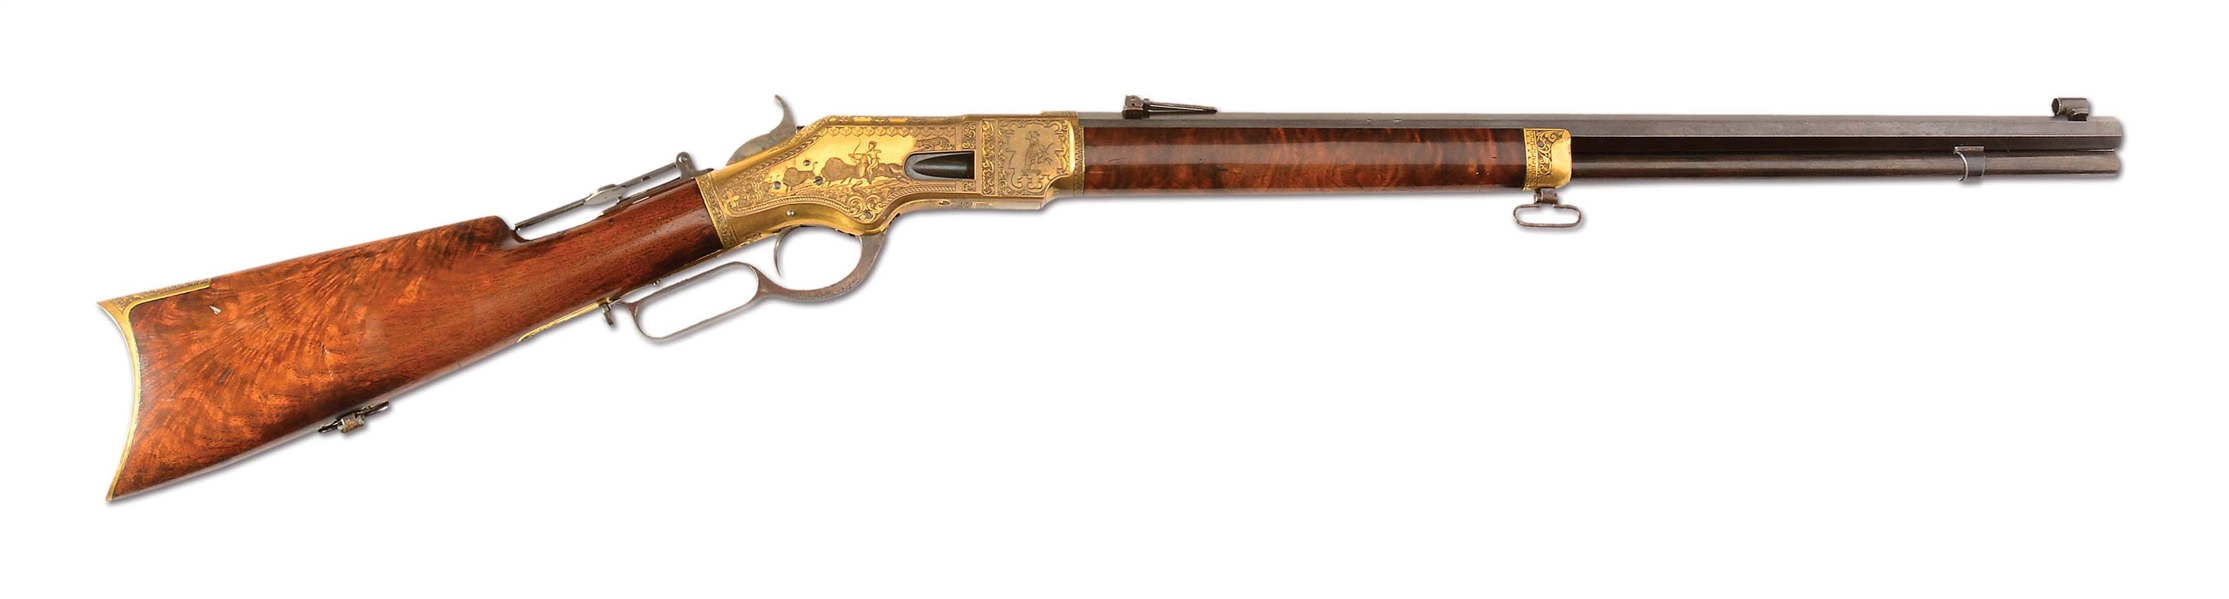 (A) EXTRAORDINARILY RARE AND BEAUTIFUL FACTORY ENGRAVED GILDED FRAME 1866 WINCHESTER RIFLE WITH FACTORY DELUXE 4X WOOD STOCK.